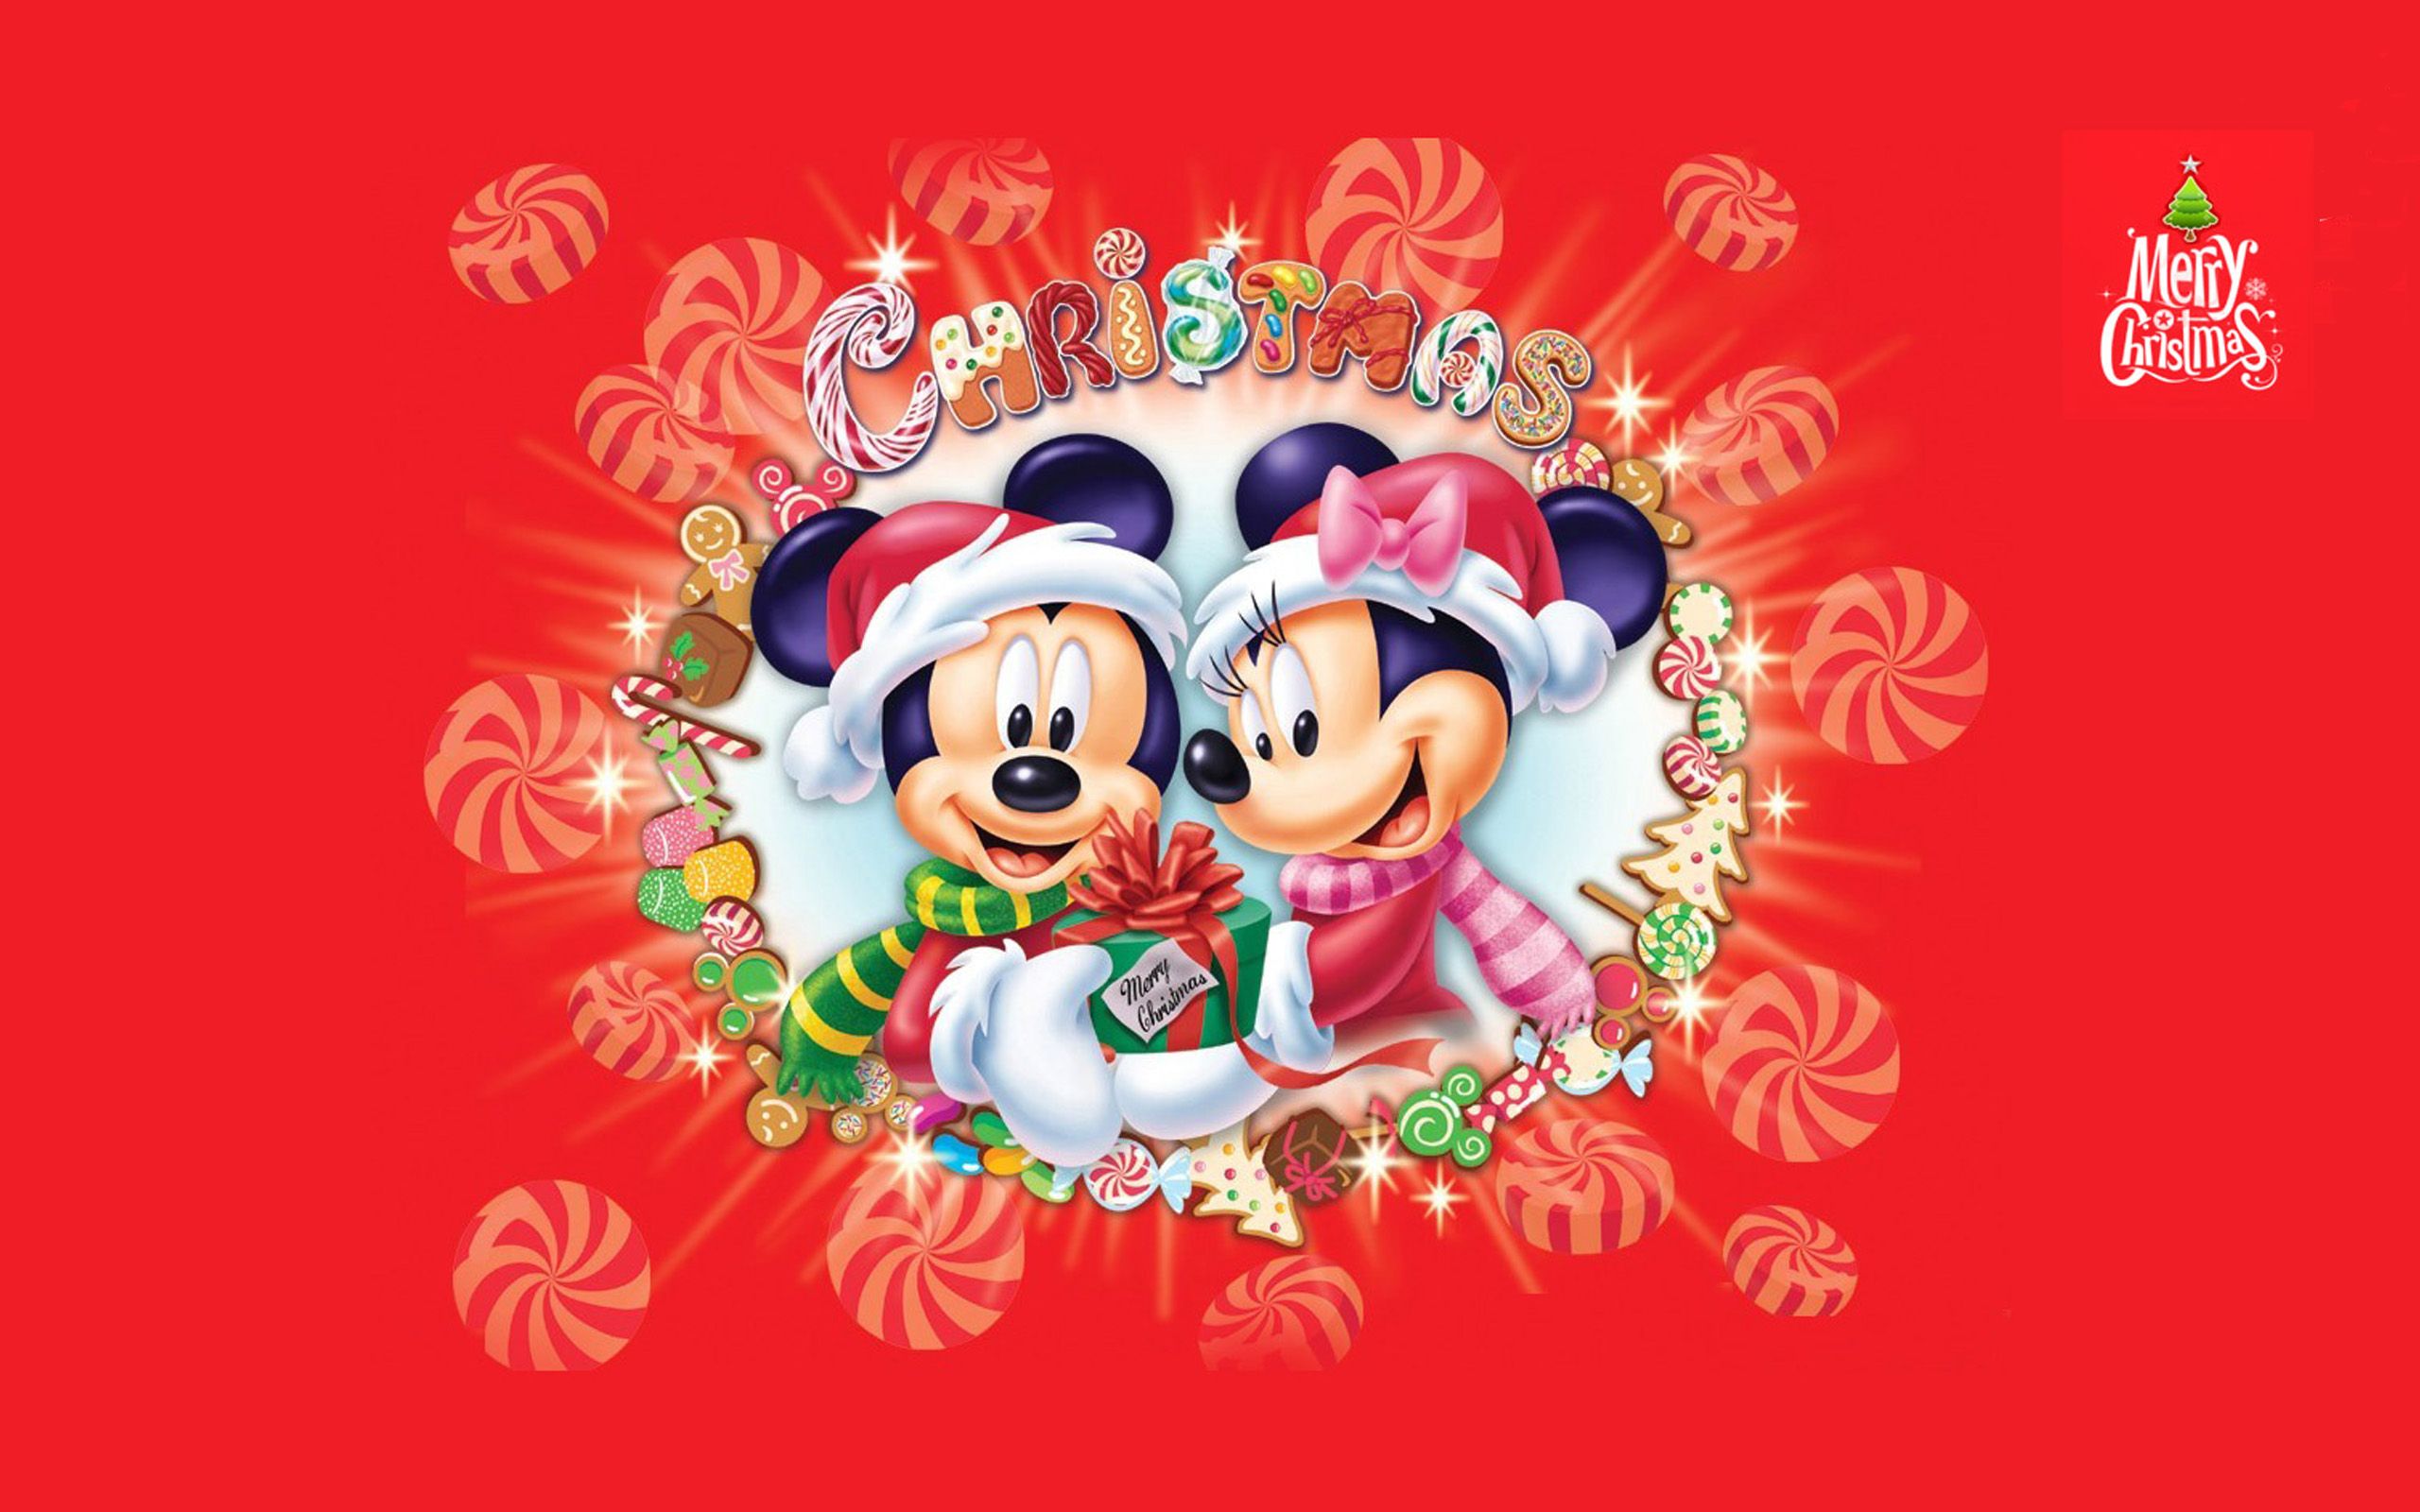 Disney Merry Christmas Images Wallpapers